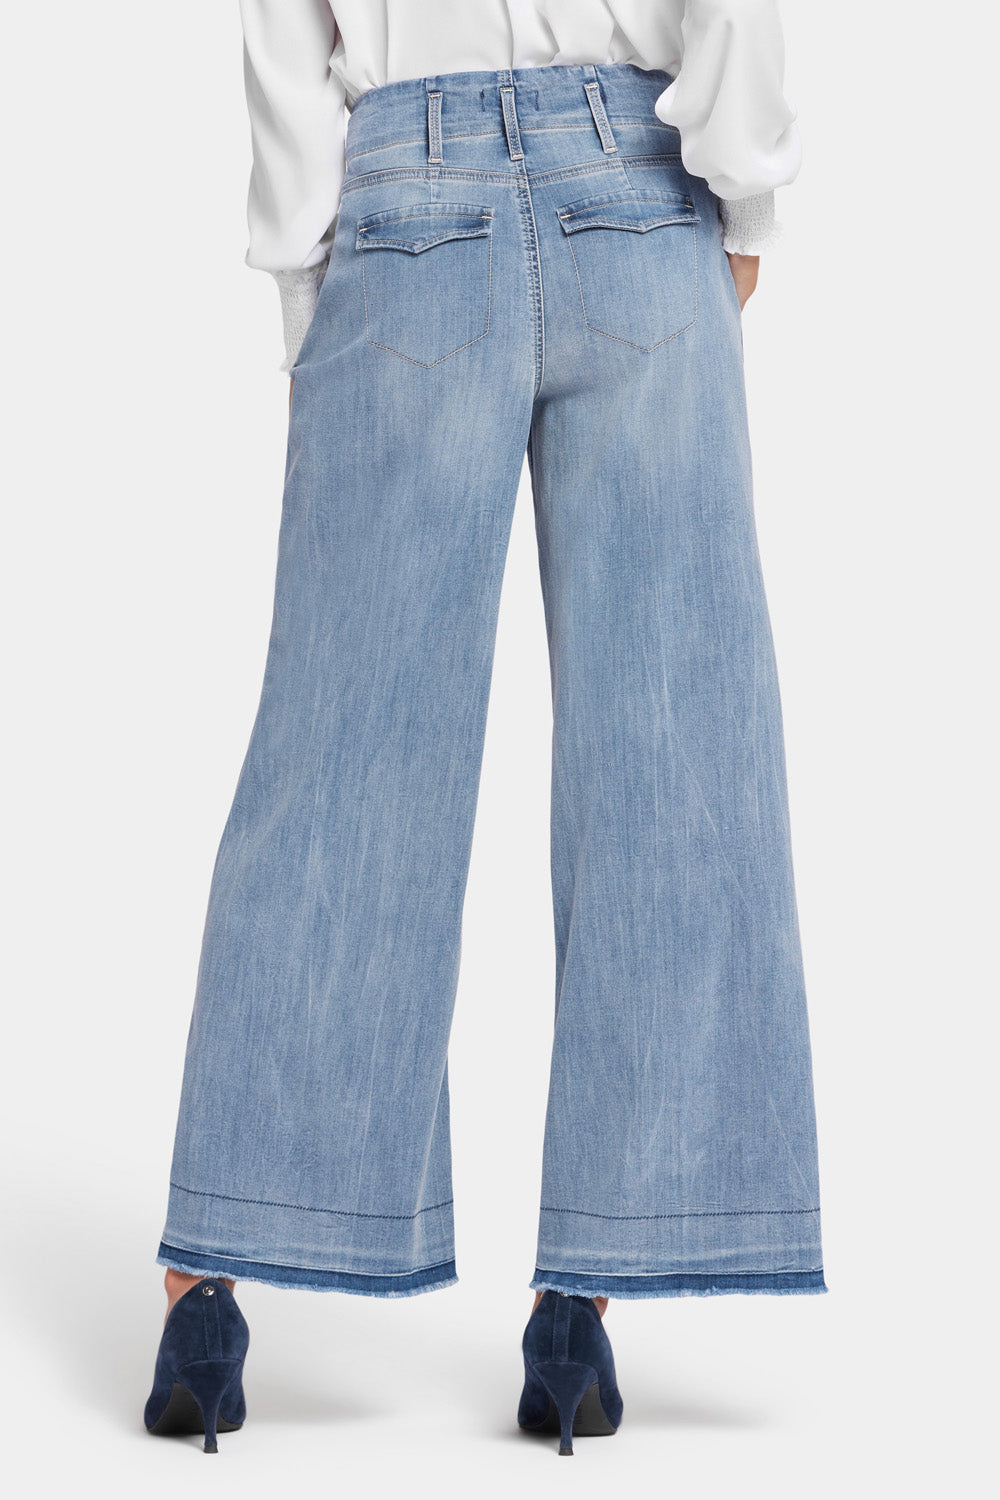 Mona Wide Leg Trouser Jeans With High Rise And Frayed Shadow Hems ...